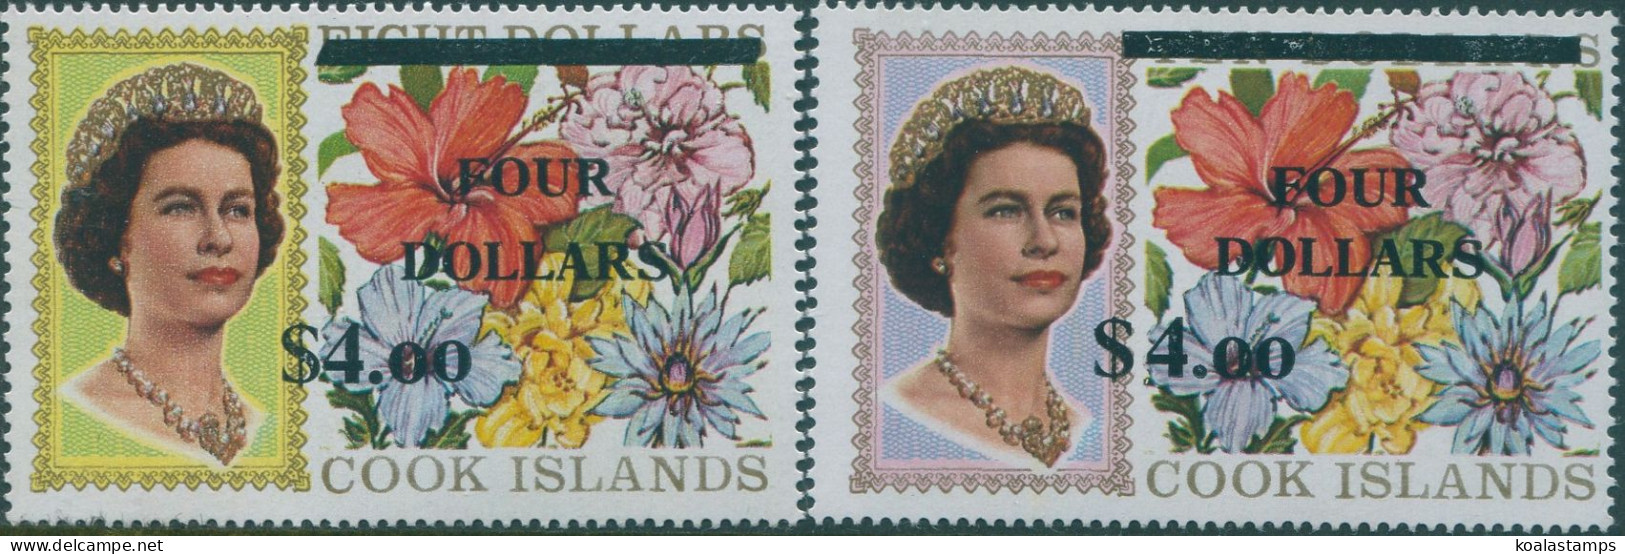 Cook Islands 1970 SG335-336 $4 Surcharges QEII Flowers Set MNH - Cookinseln